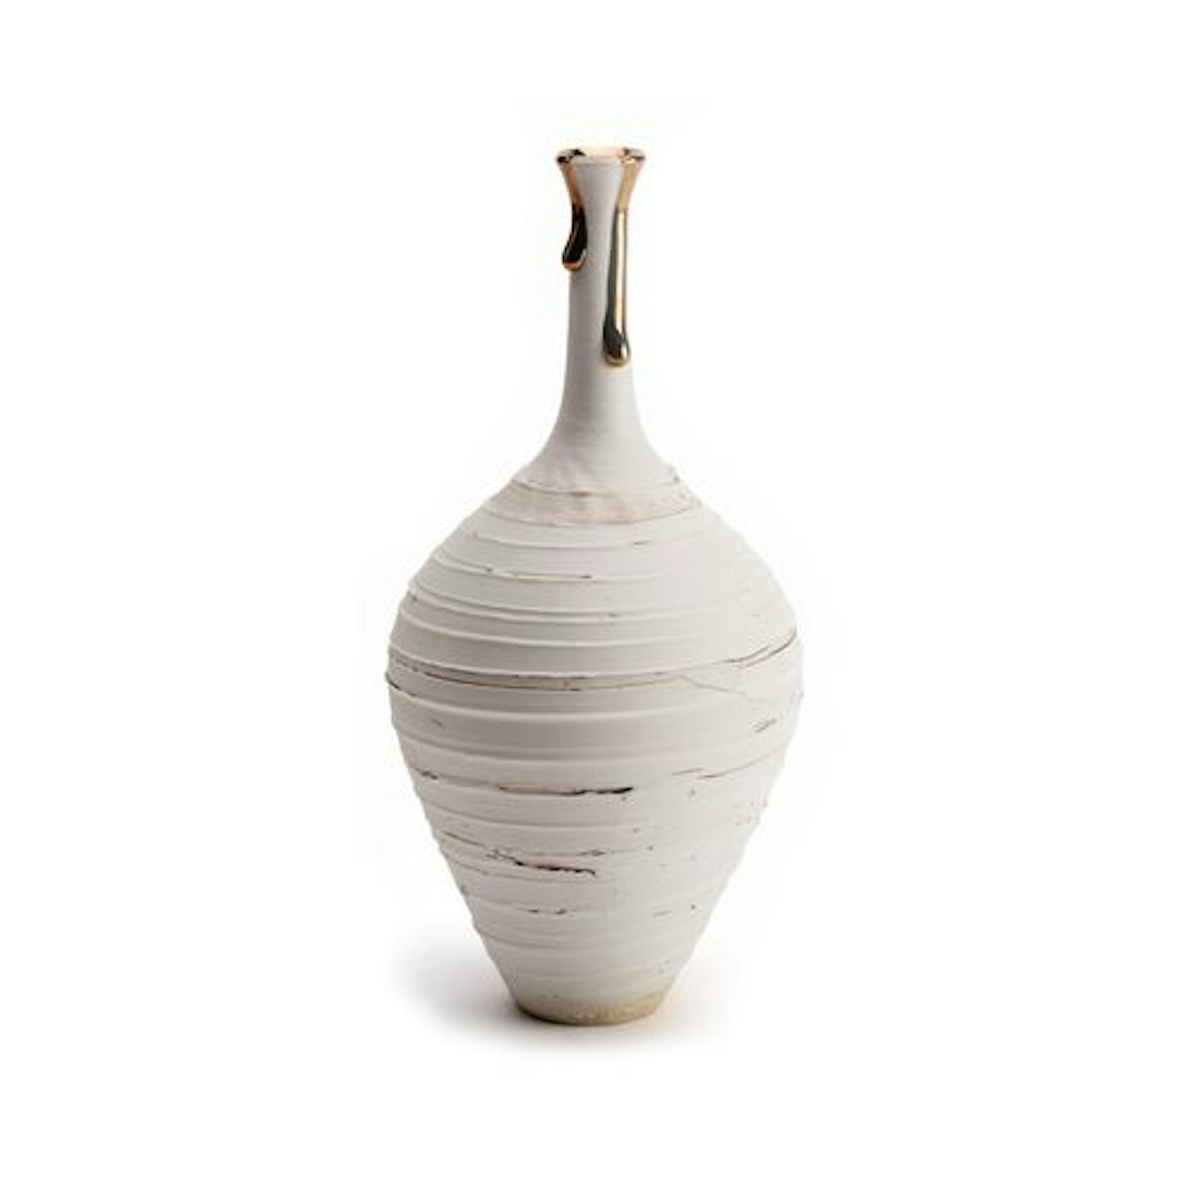 Cream Crackle Long Neck Vase - 9 Best Decorative Vases To Buy For Your Home - Style Guide - LuxDeco.com 